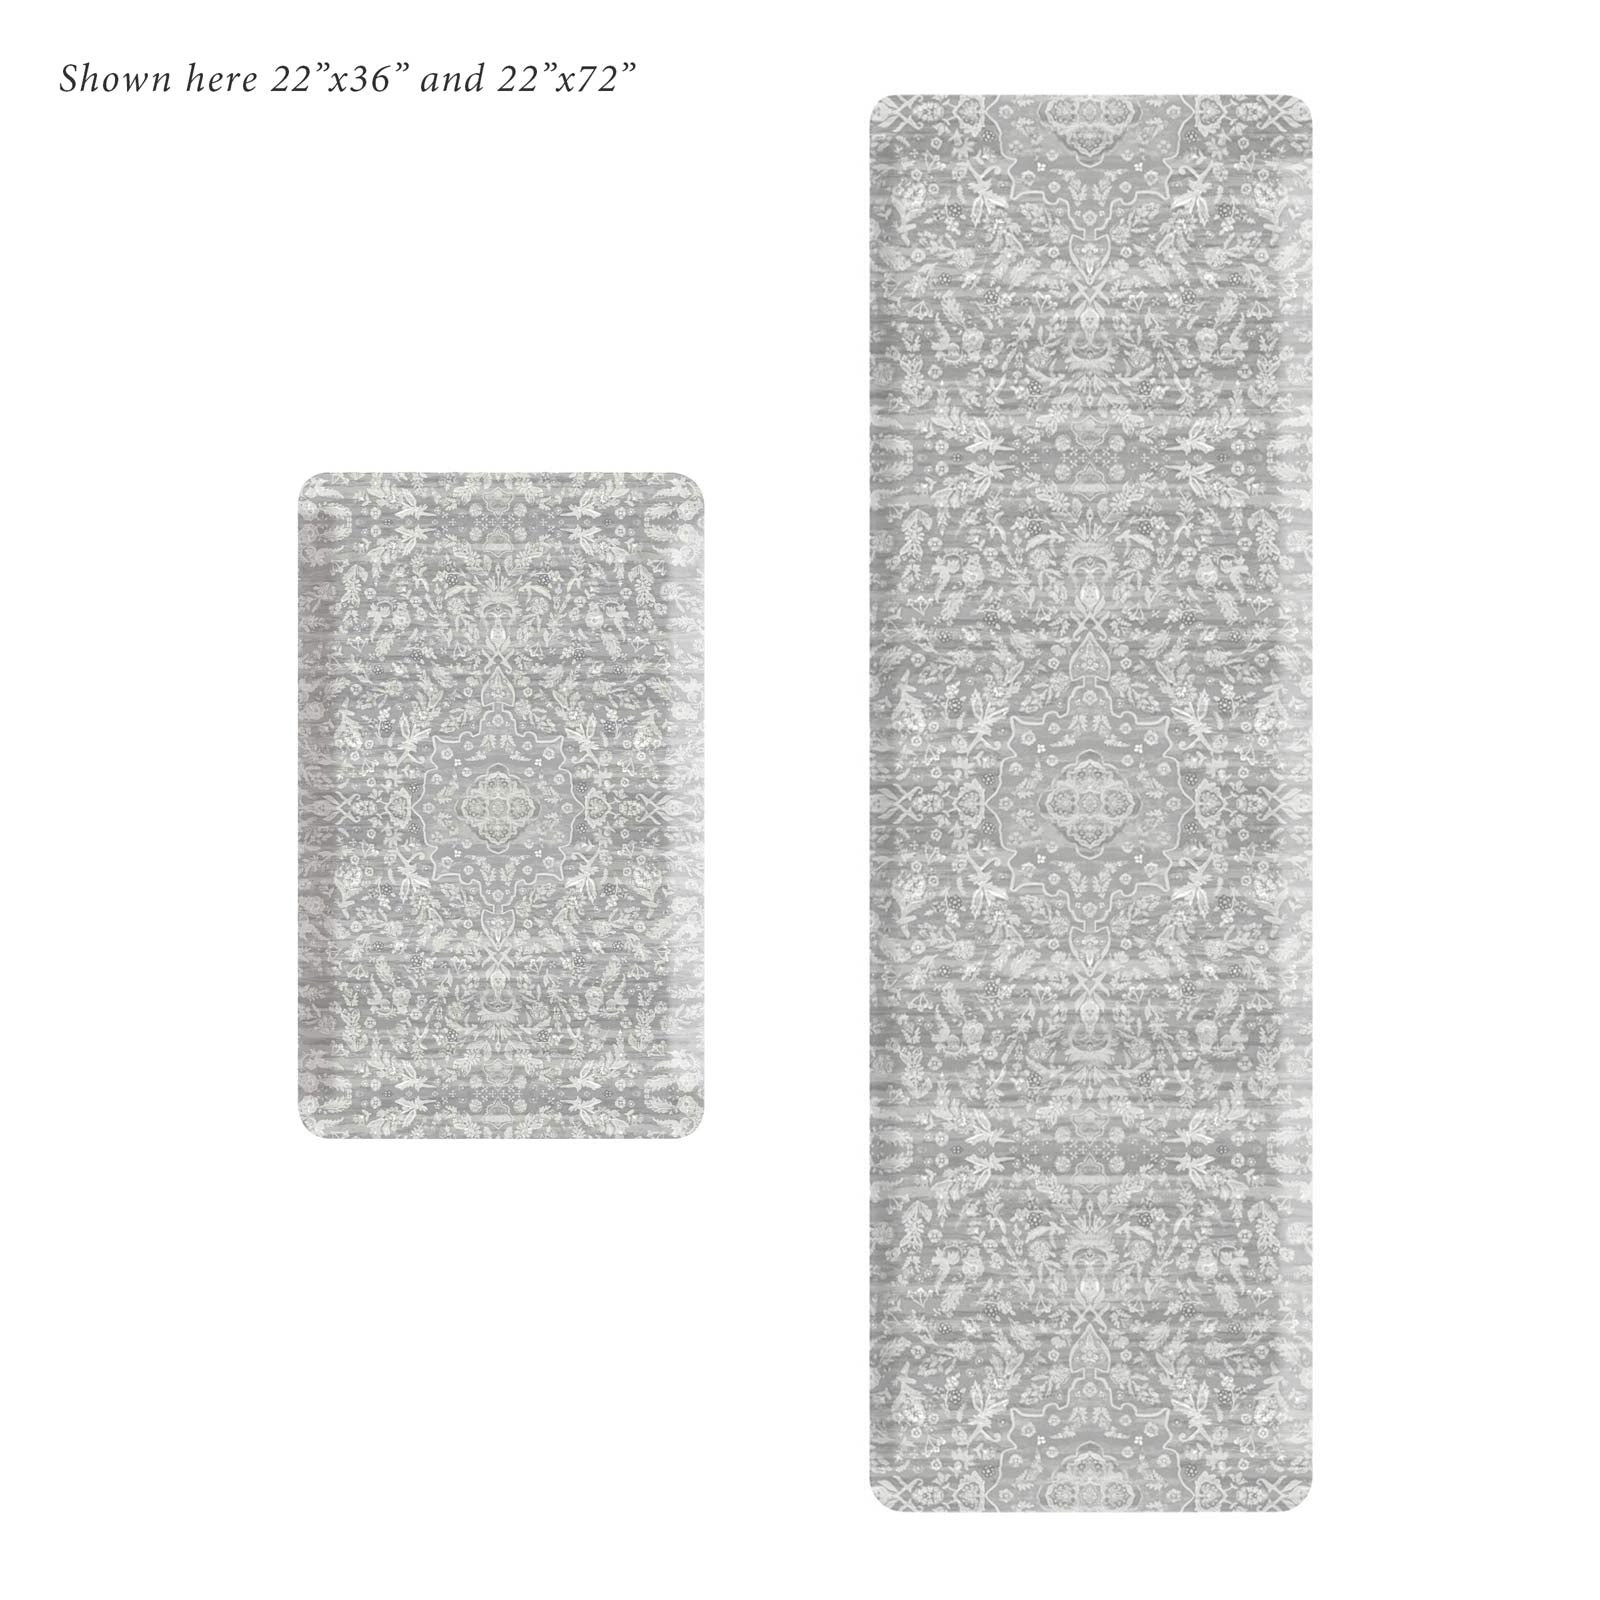 Emile earl grey gray and cream floral standing mat shown in sizes 22x36 and 22x72